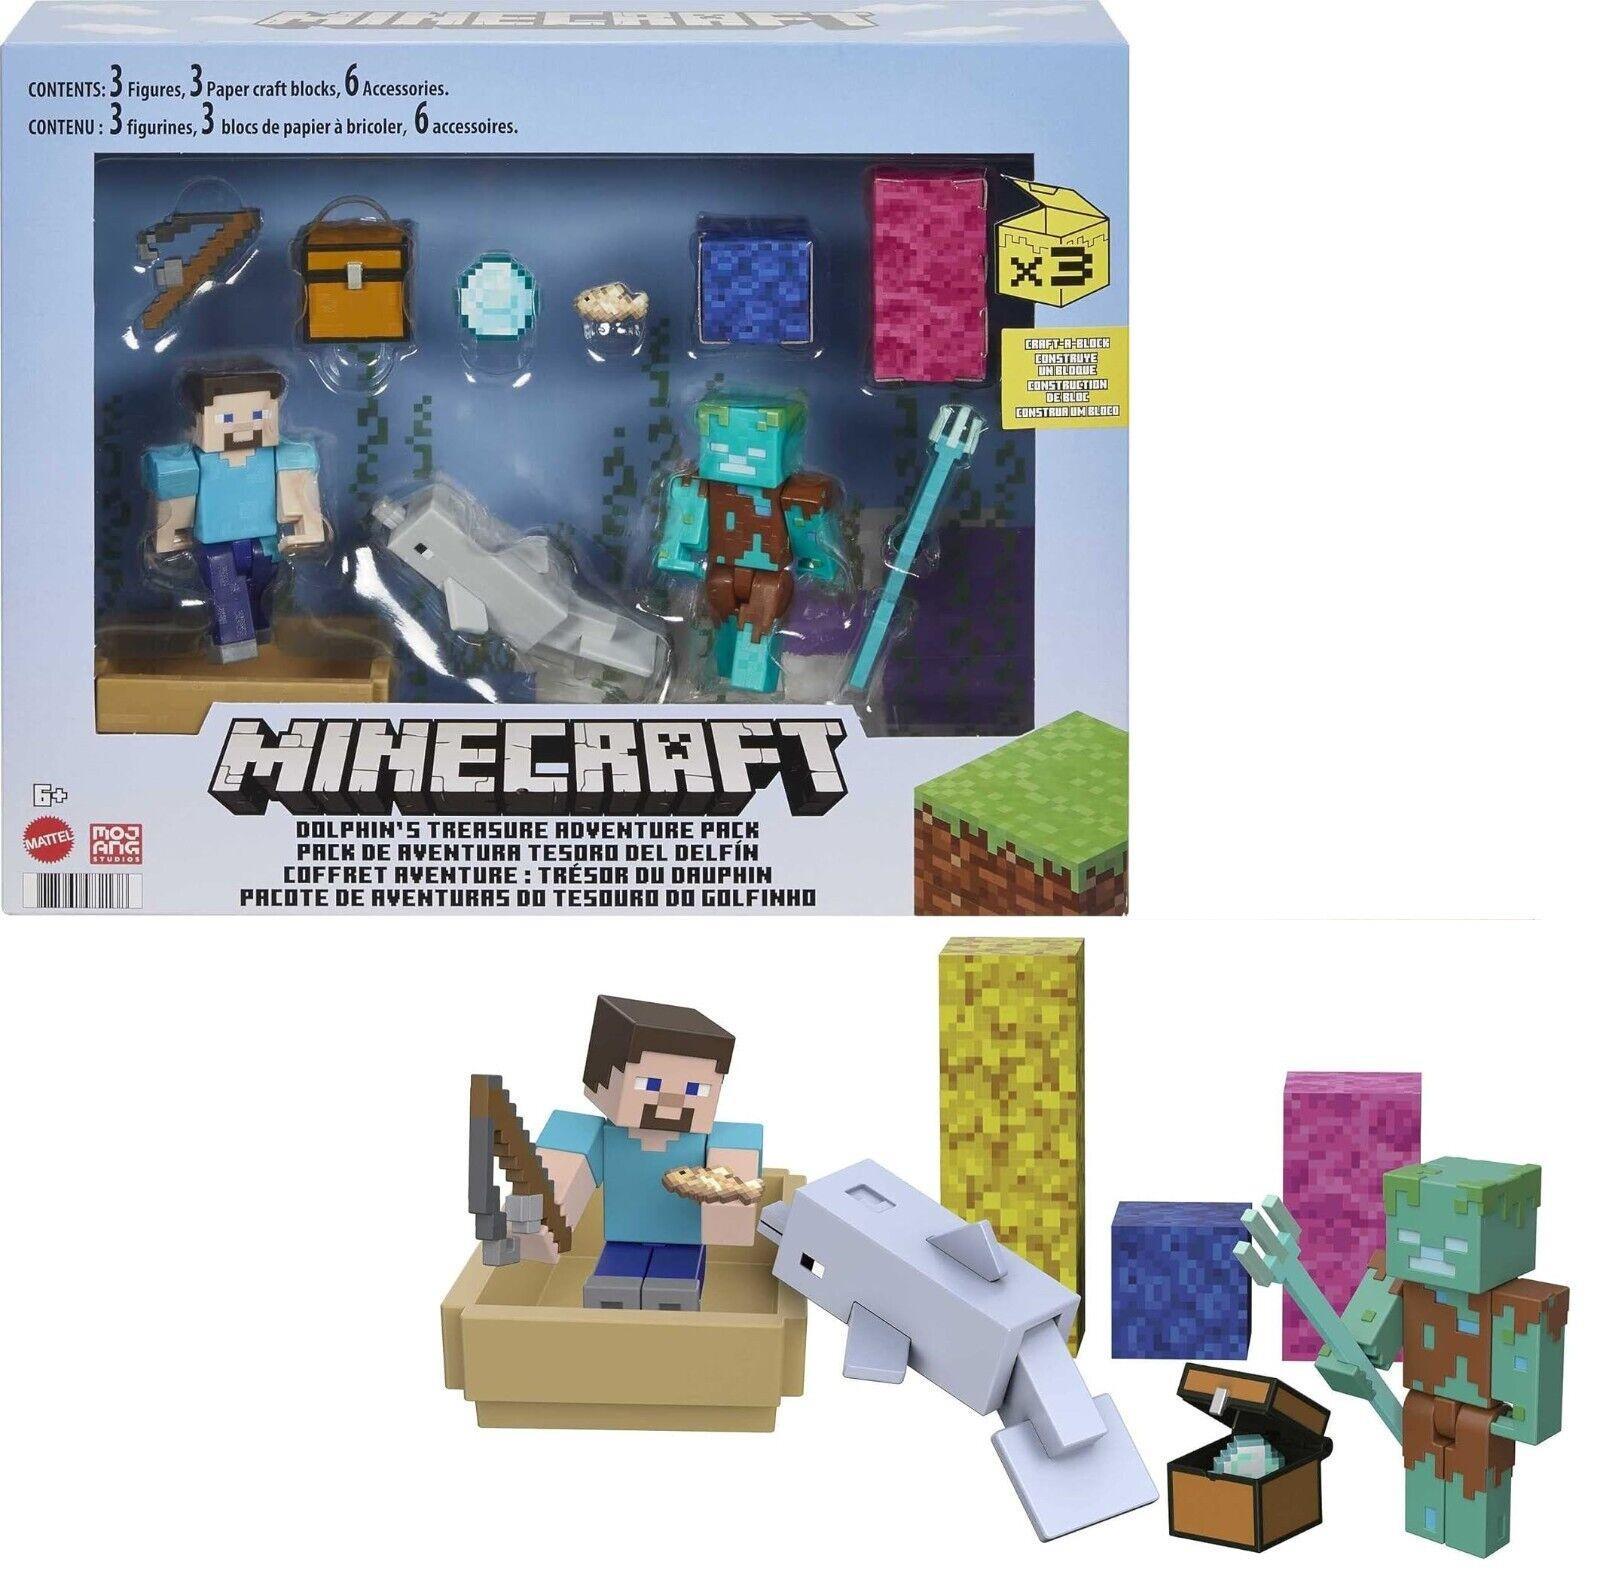 Minecraft Dolphins Adventure Treasure Pack Hunt Story Pack Ages 6+ Toy Figures